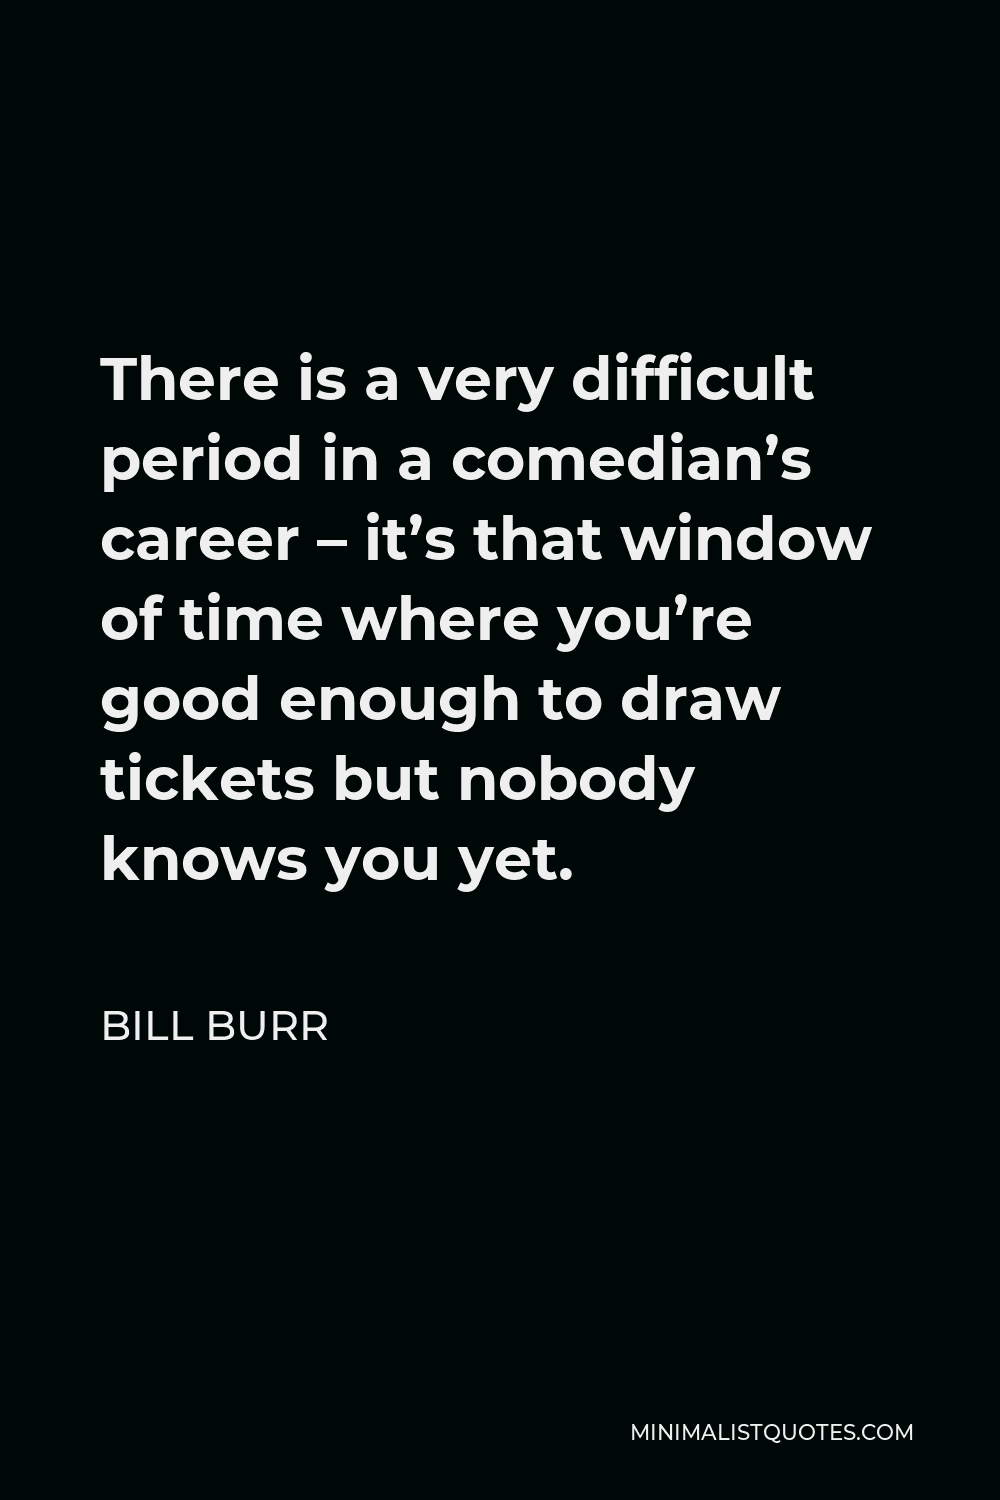 Bill Burr Quote - There is a very difficult period in a comedian’s career – it’s that window of time where you’re good enough to draw tickets but nobody knows you yet.